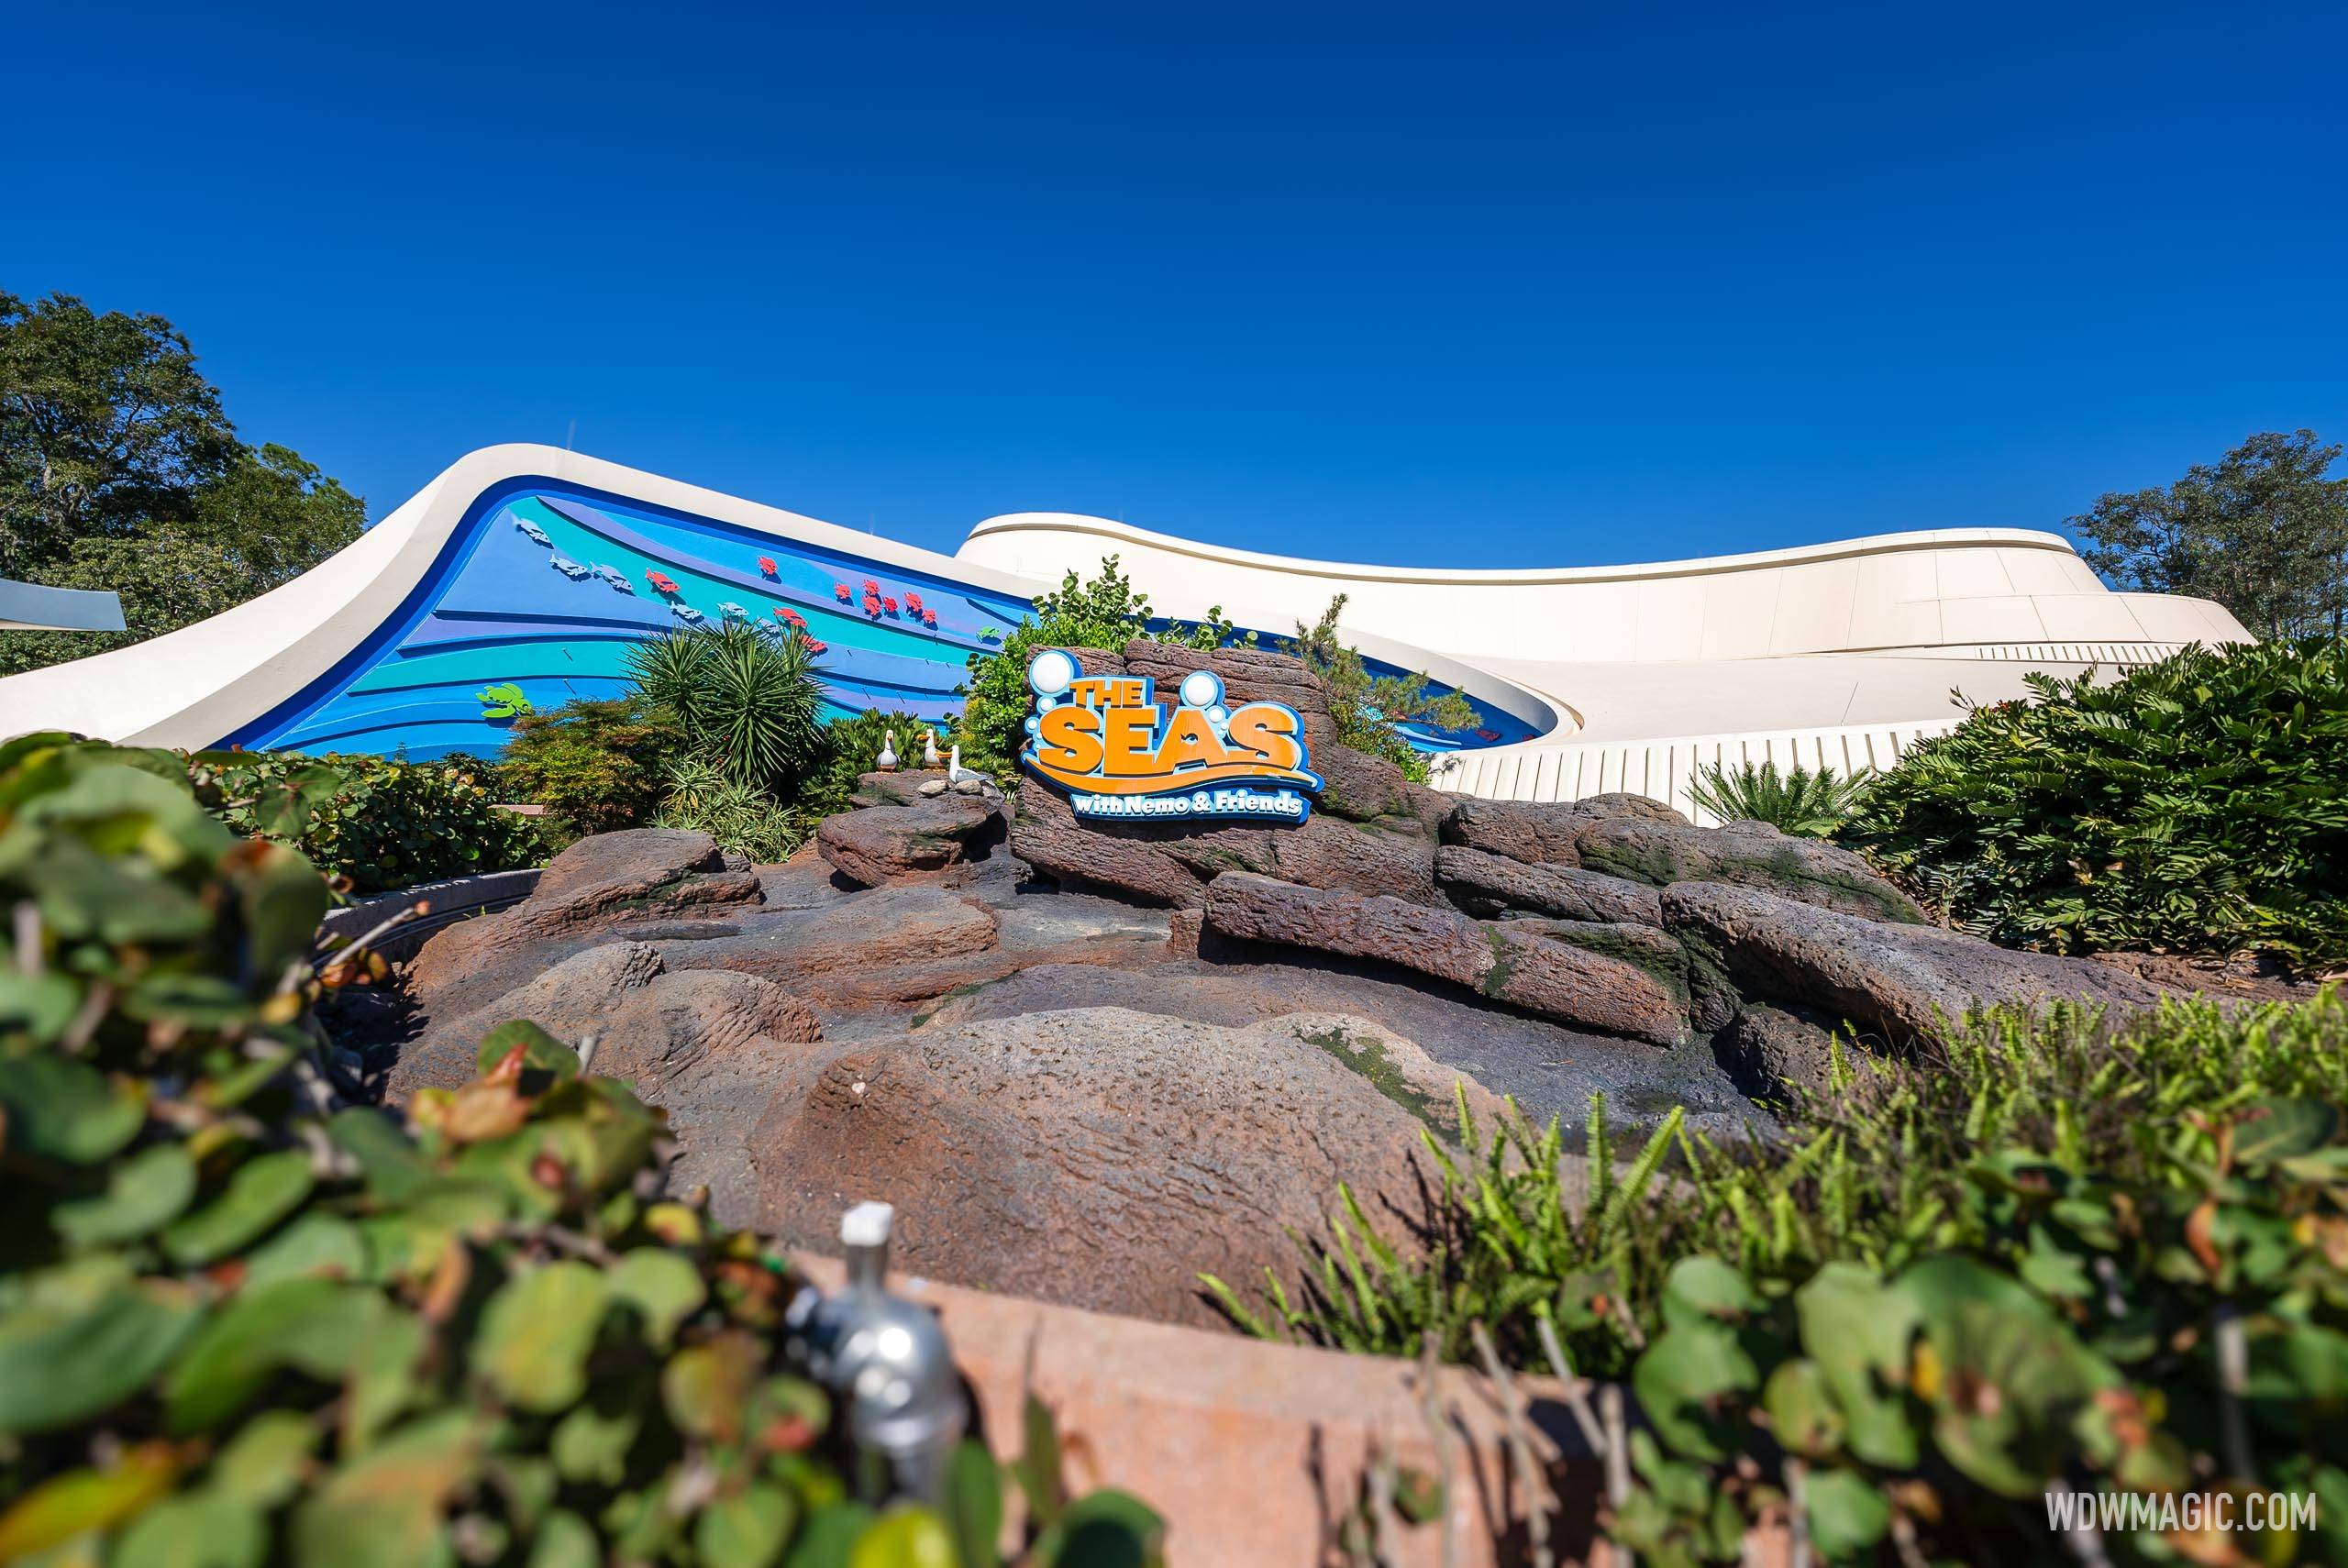 Exterior refurbishment at The Seas with Nemo and Friends - November 21 2023